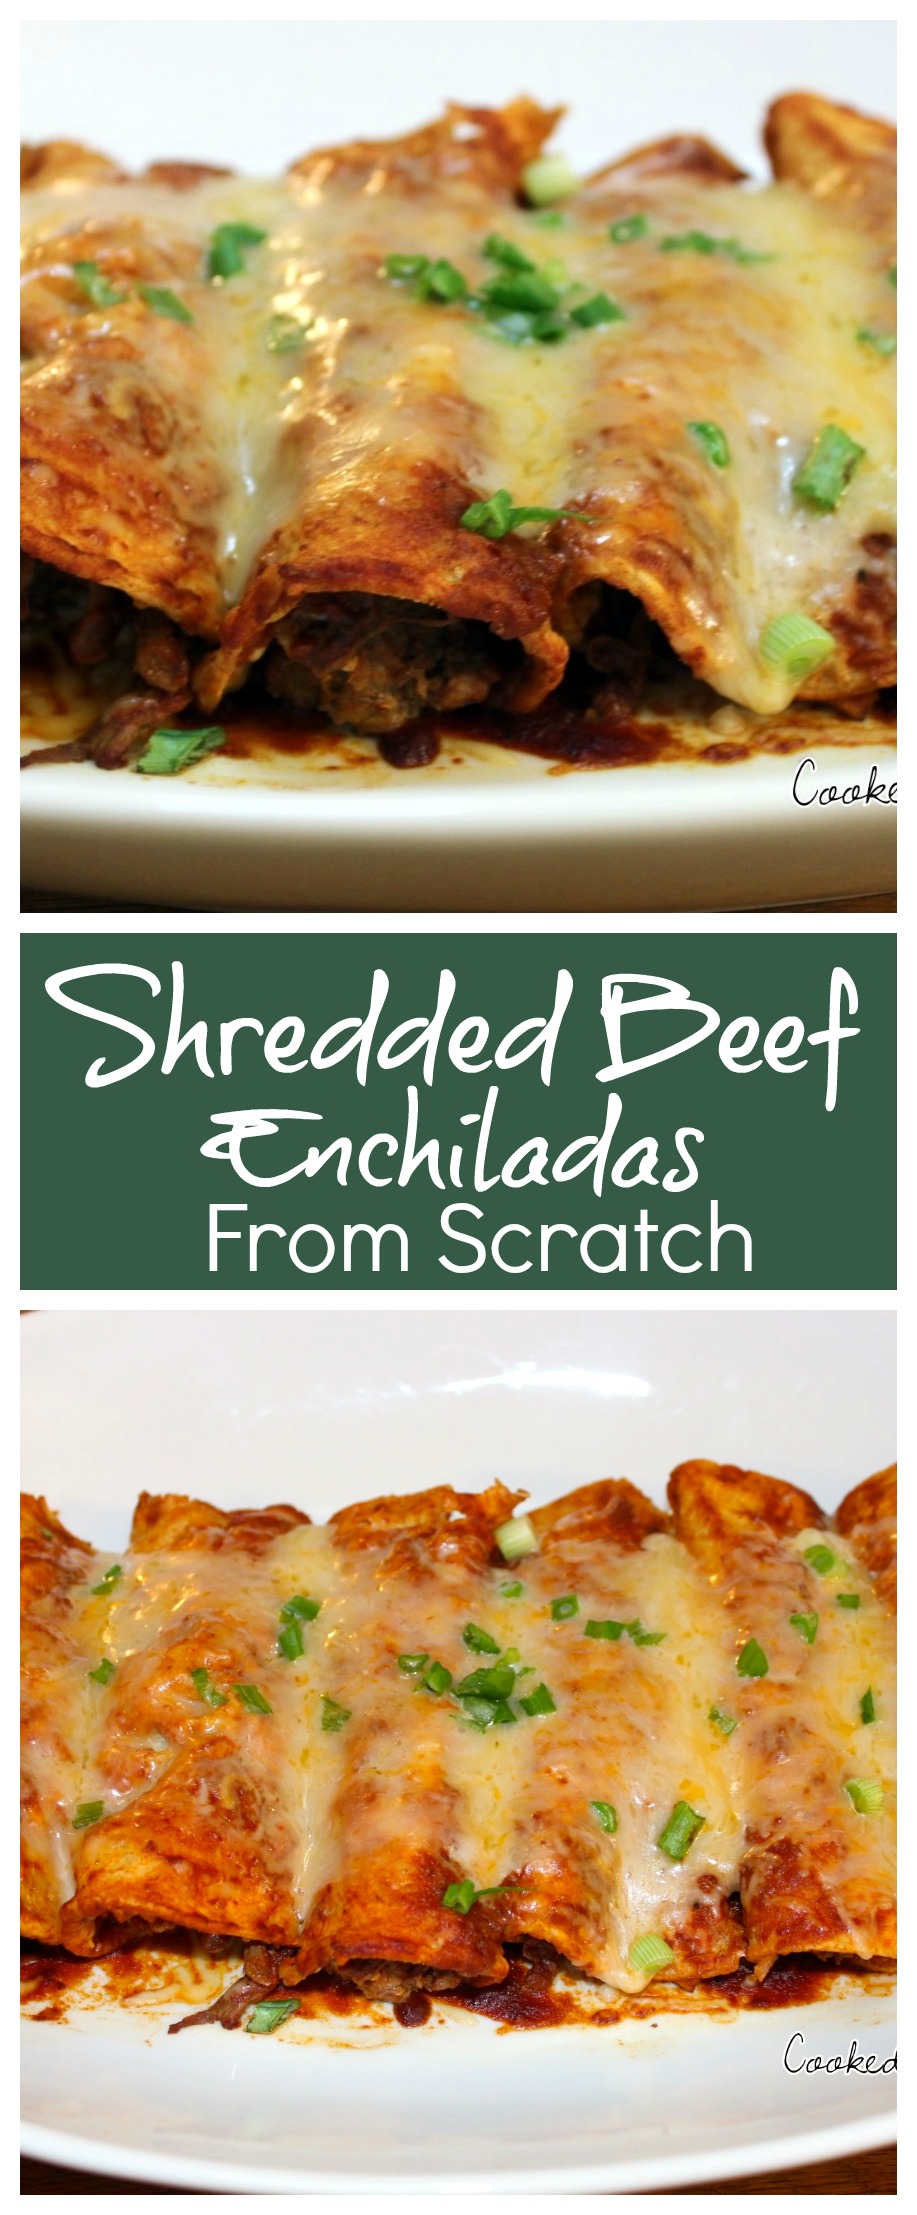 Shredded Beef Enchiladas from Scratch | How to Make Shredded Beef Enchiladas